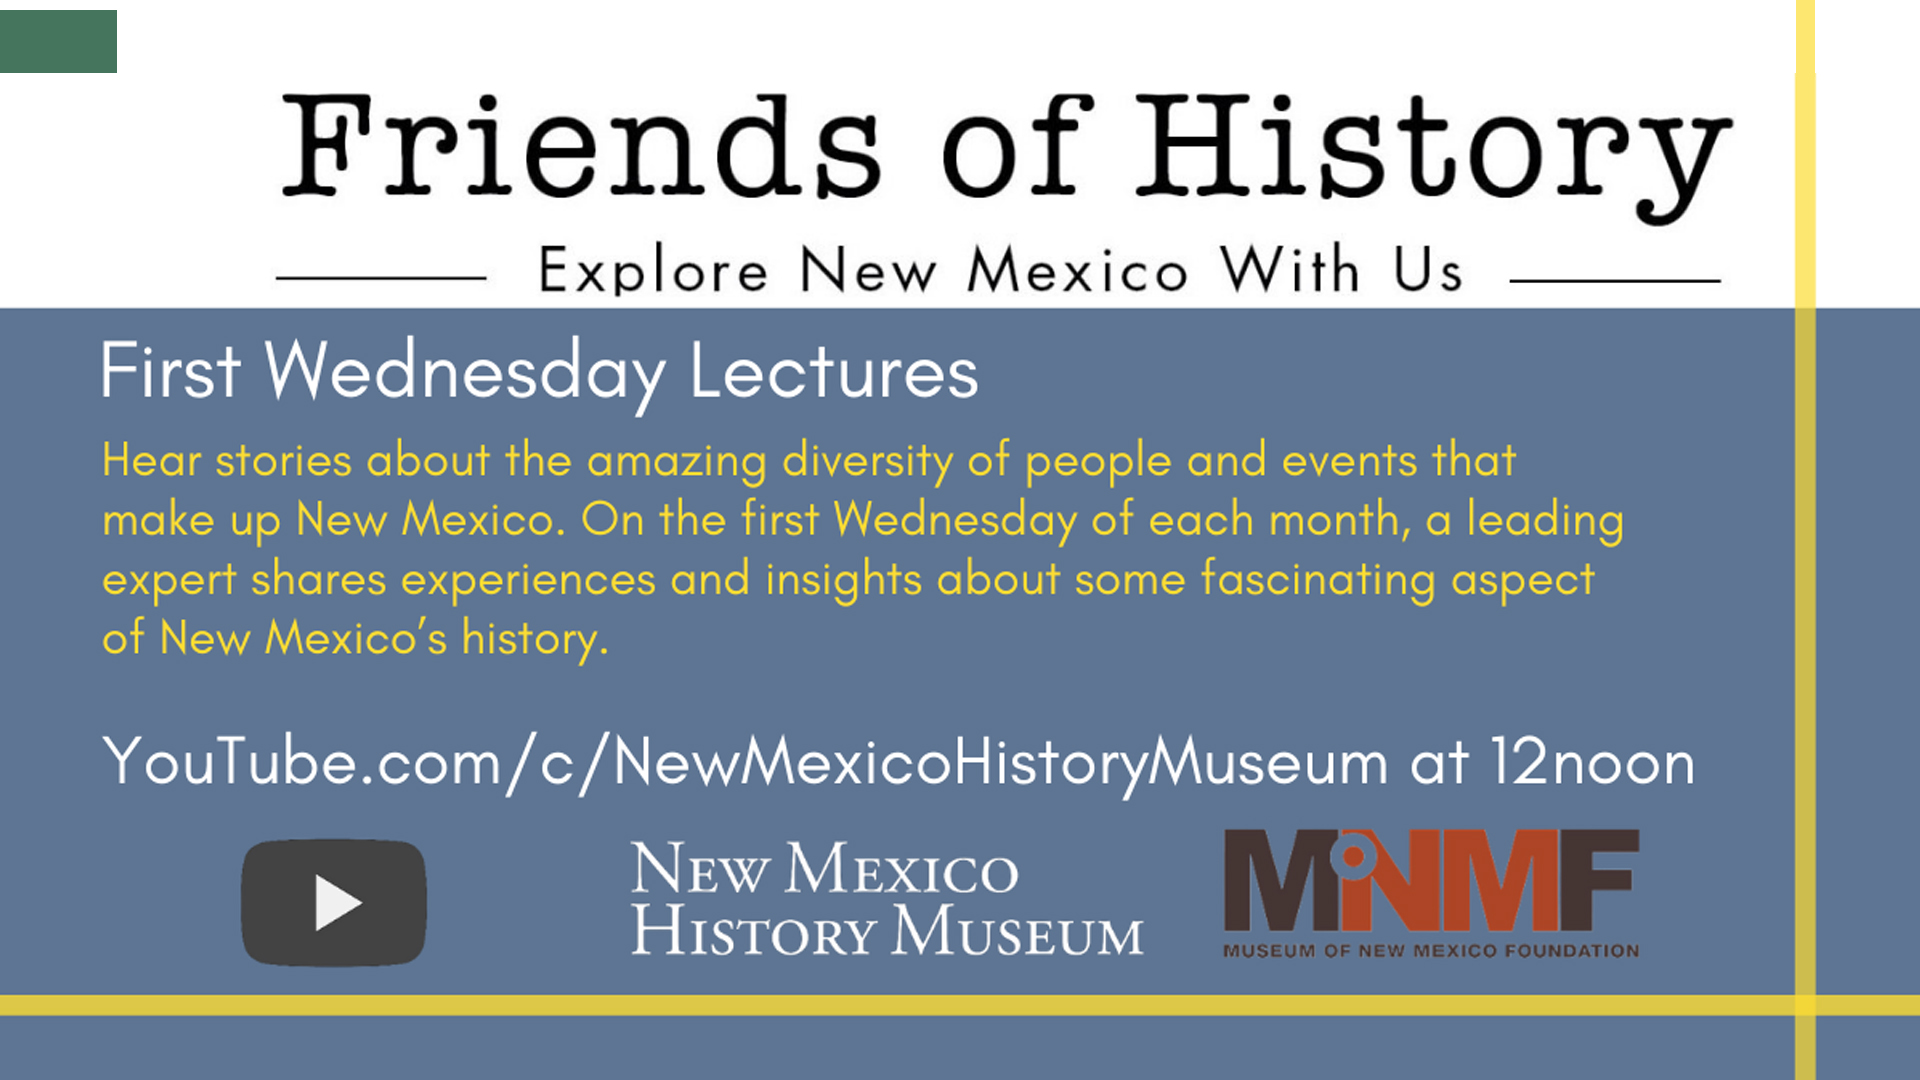 Friends of History | Explore New Mexico With Us